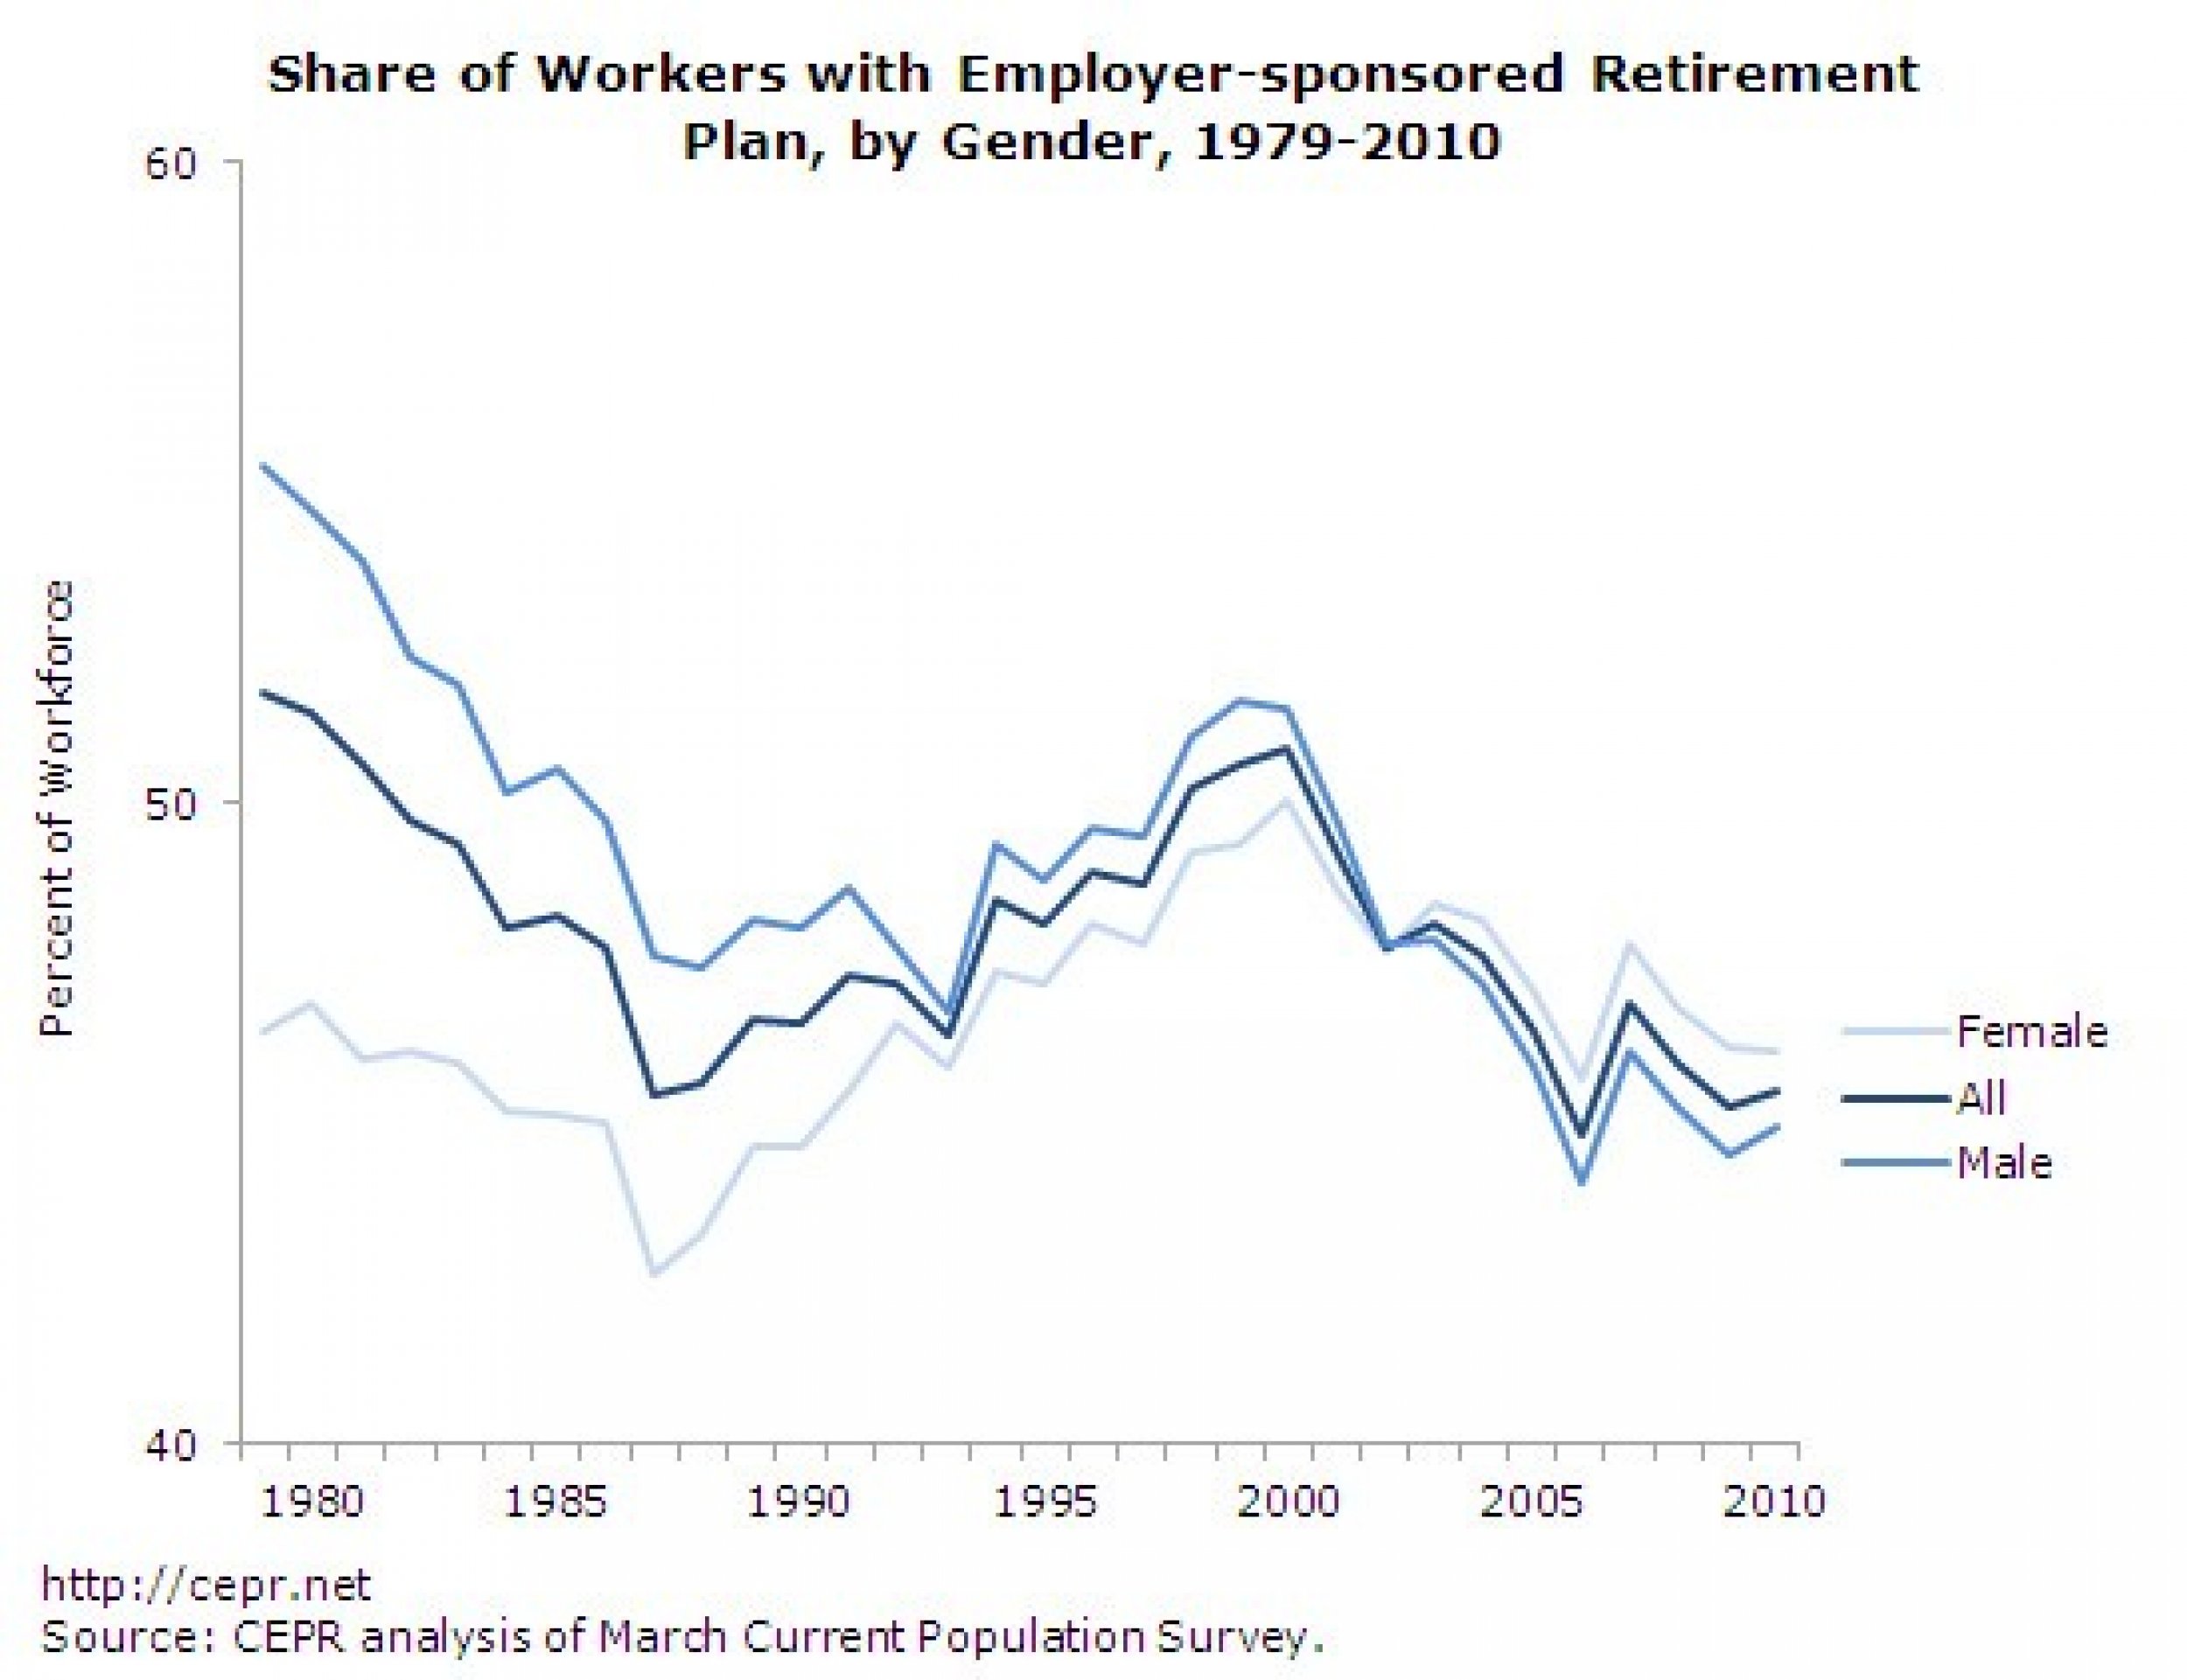 Share of Workers with Employer-sponsored Retirement Plan, by Gender, 1979-2010